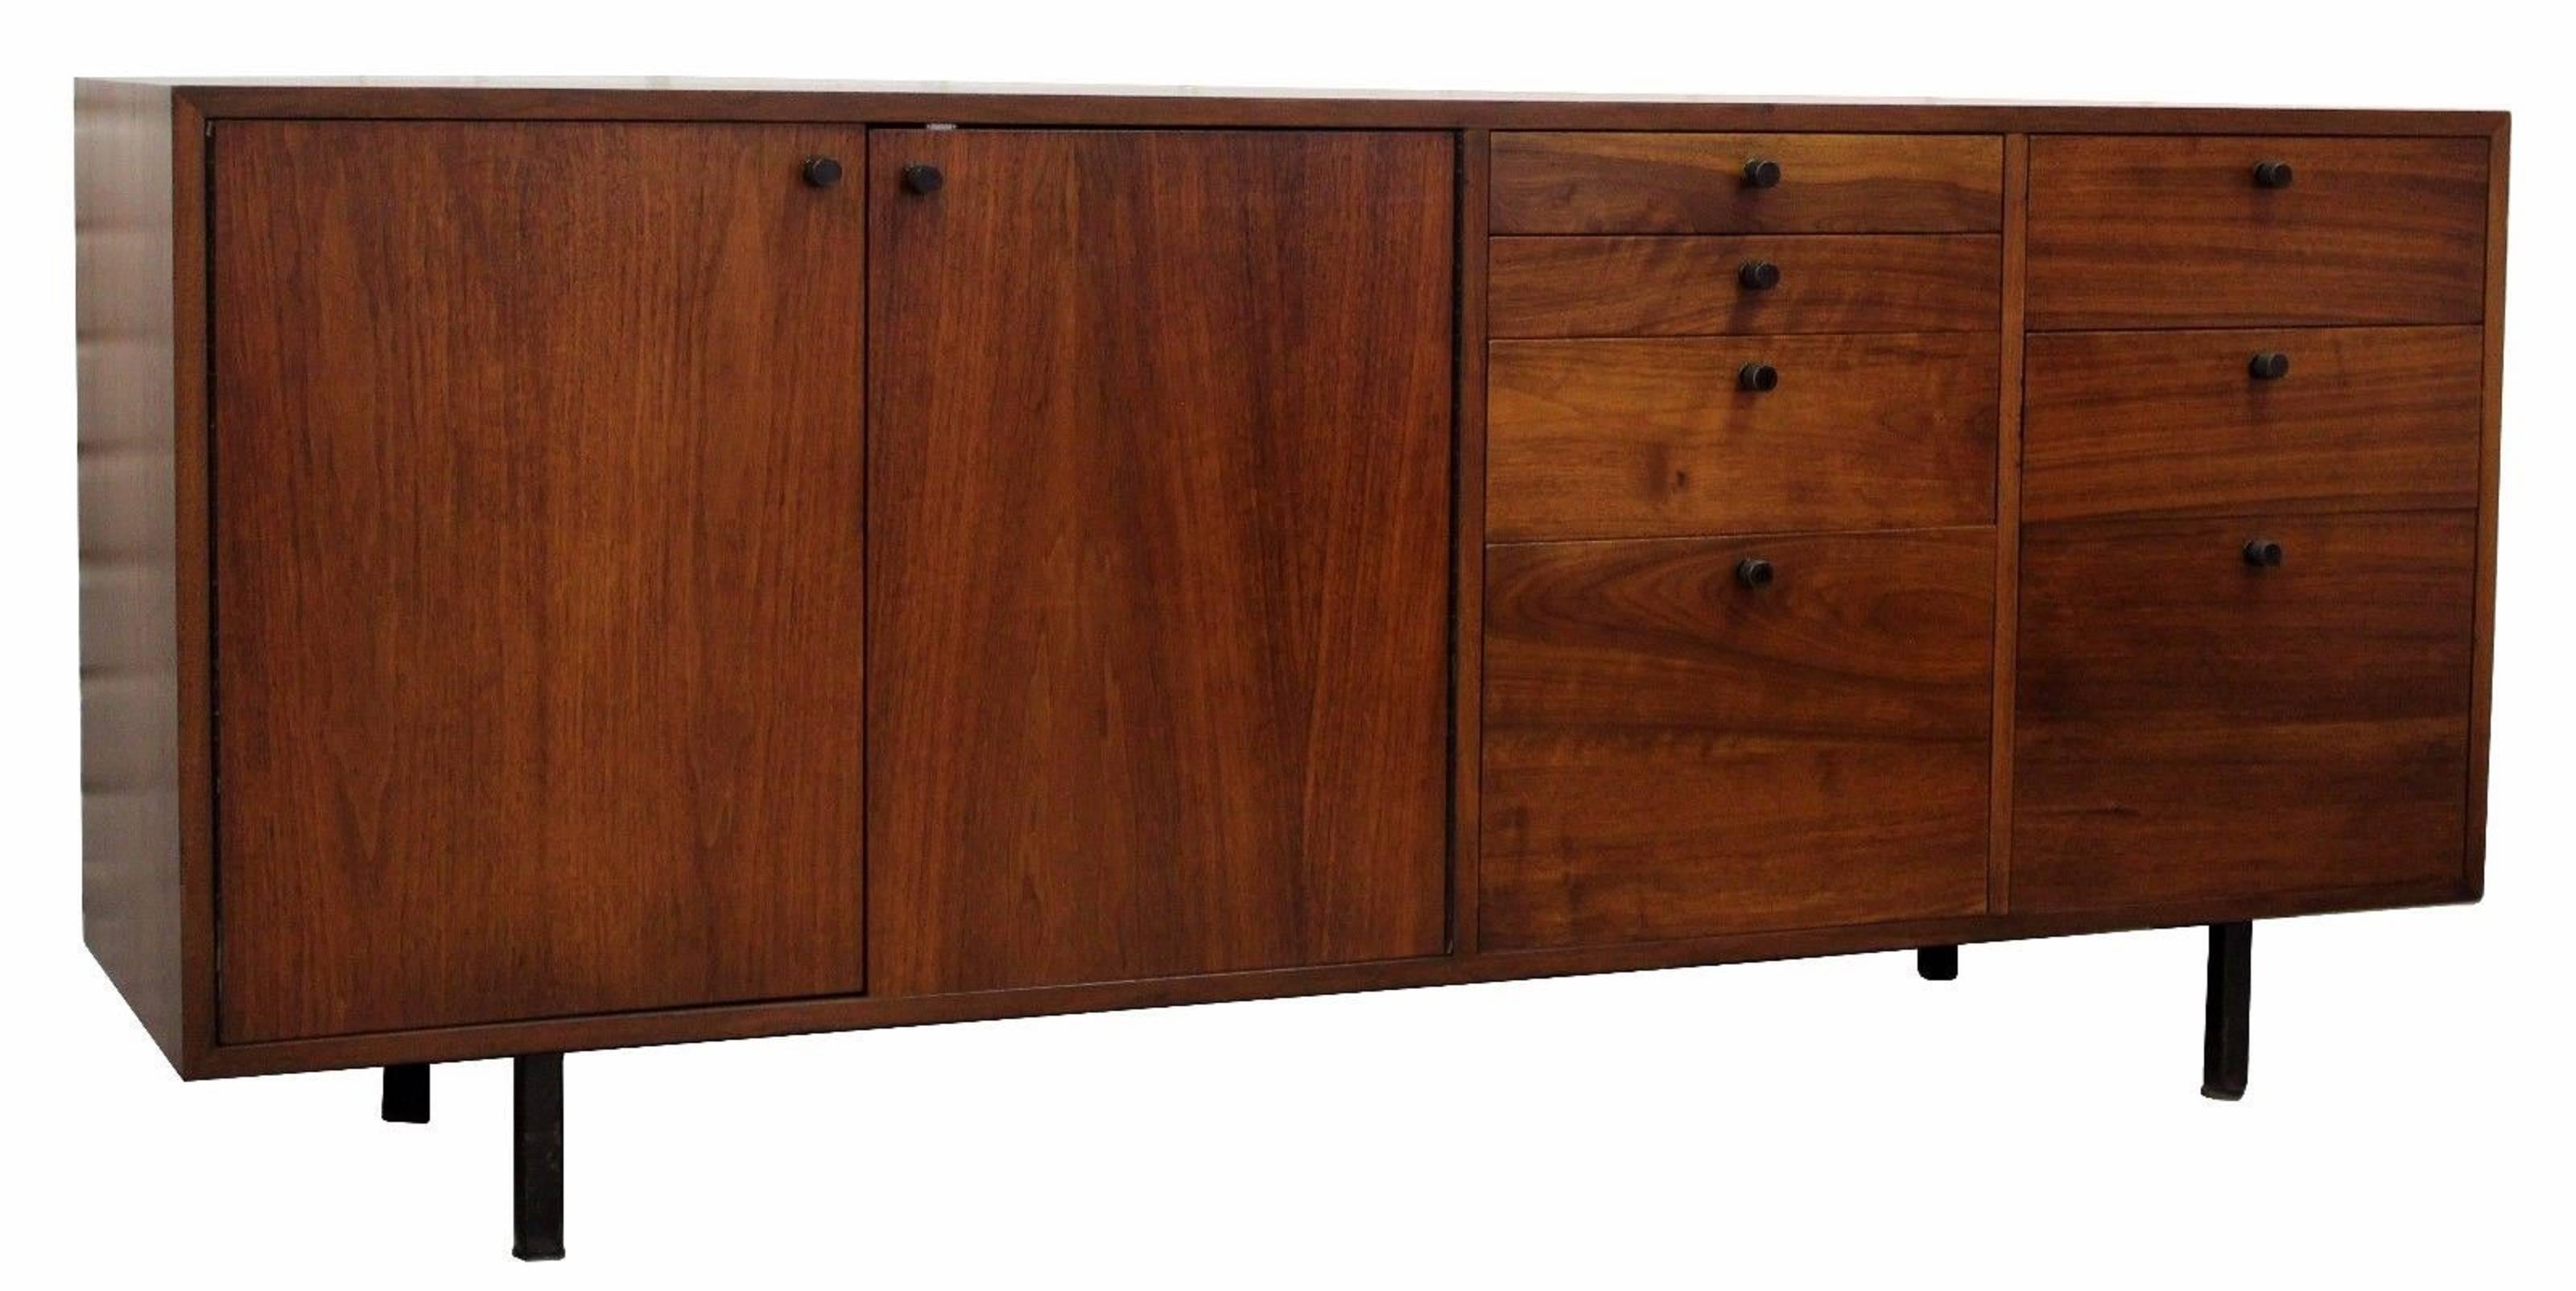 For your consideration is a custom-made, pair of walnut wood credenzas, designed by Ward Bennett or Warren Platner for Lehigh Furniture Co, circa 1965. In excellent condition. The dimensions of the long credenza are 68